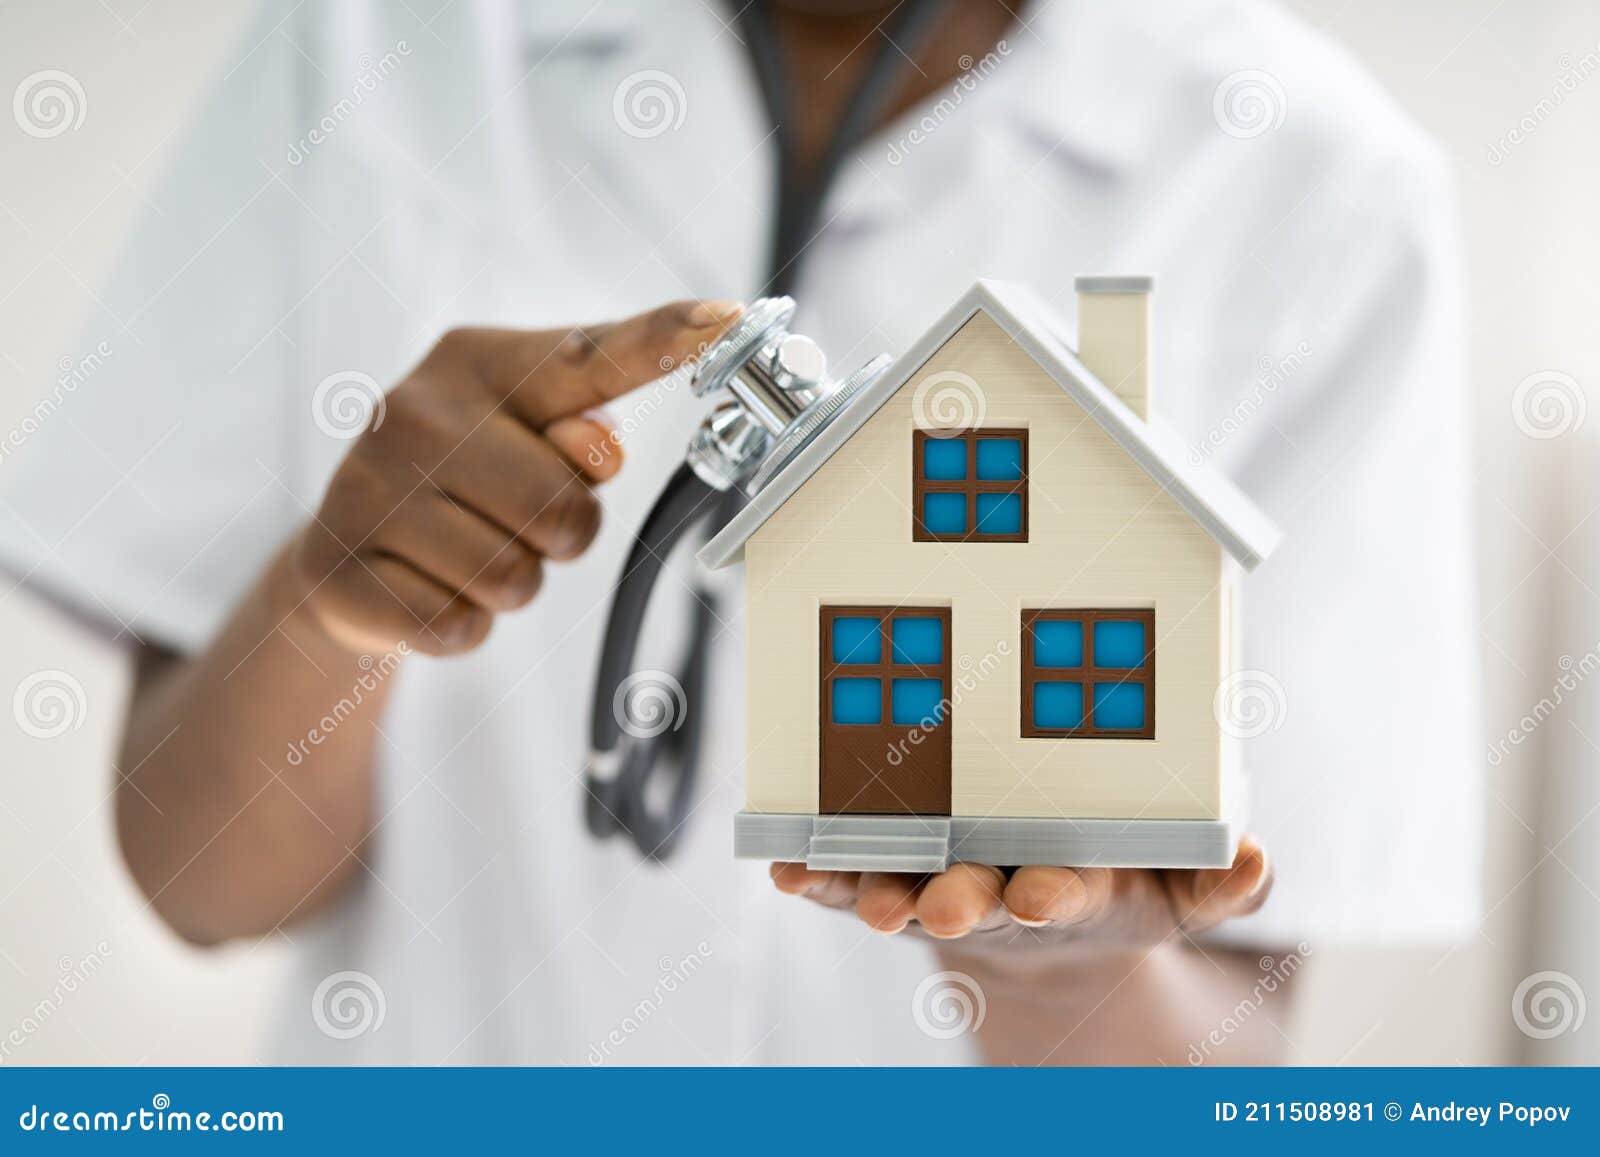 doctor homecare or home inspection